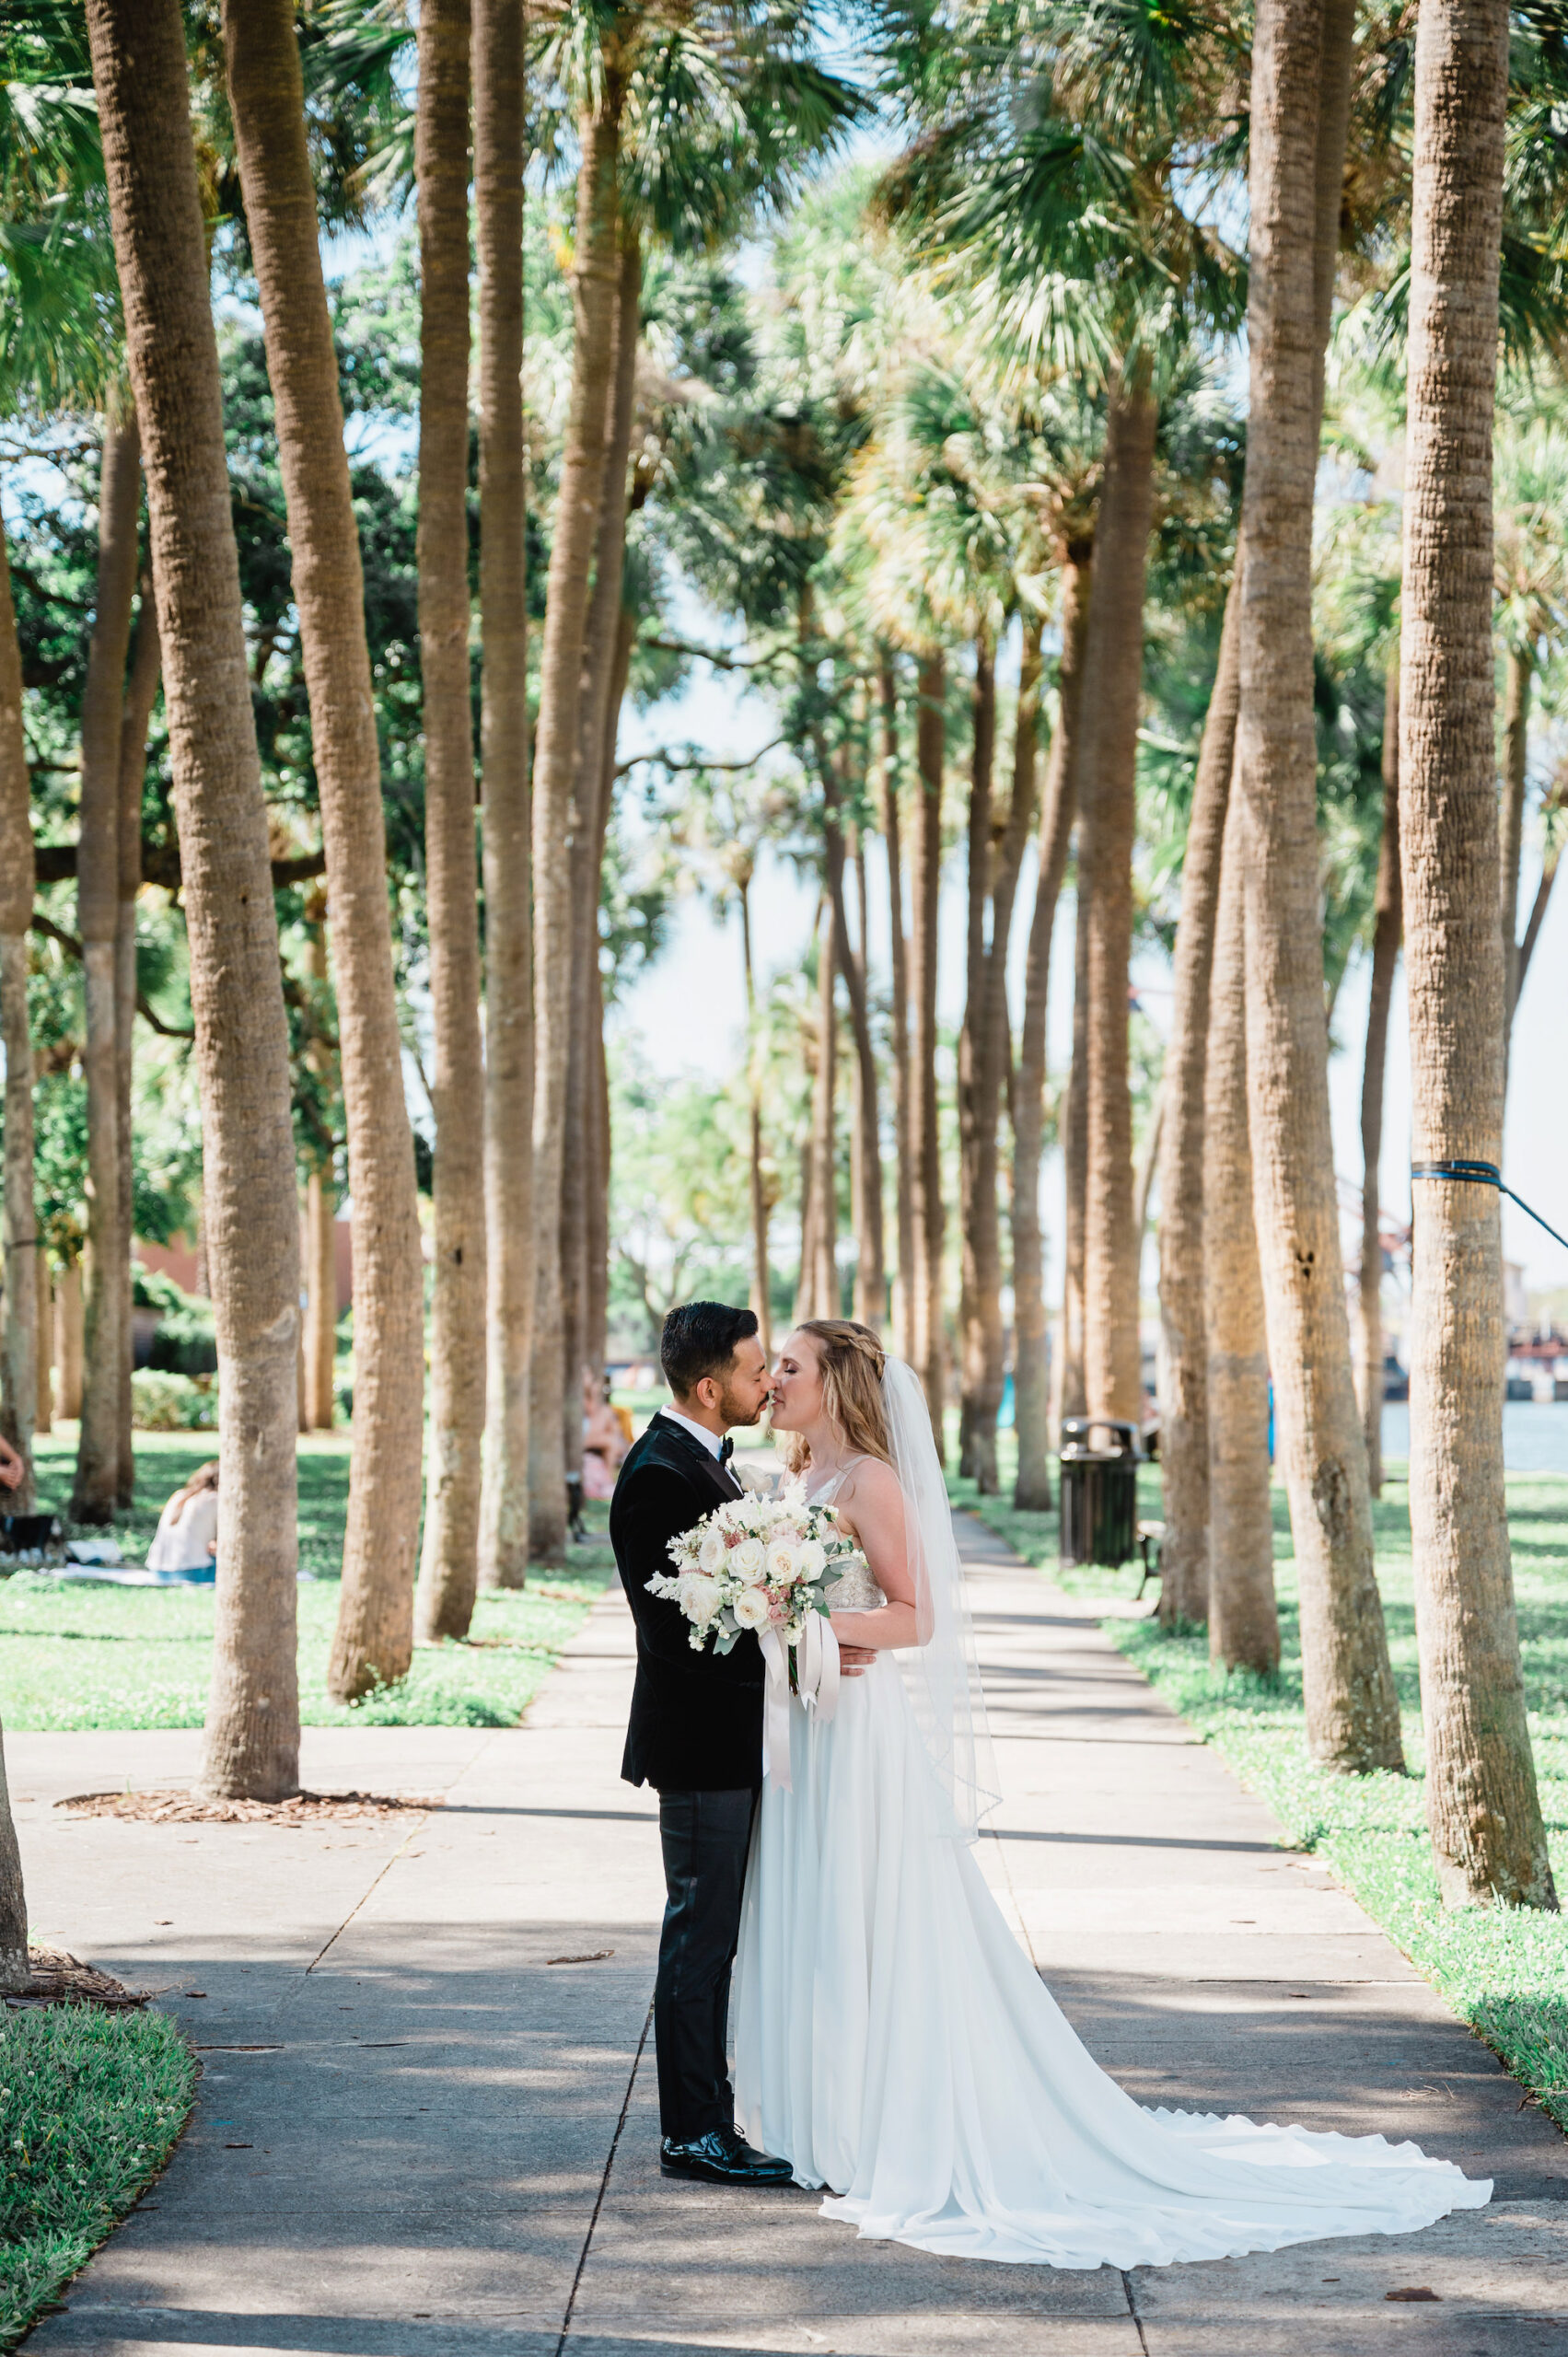 Outdoor Spring Bride and Groom Wedding Portrait | South Tampa Wedding Photographer and Videographer Iyrus Weddings